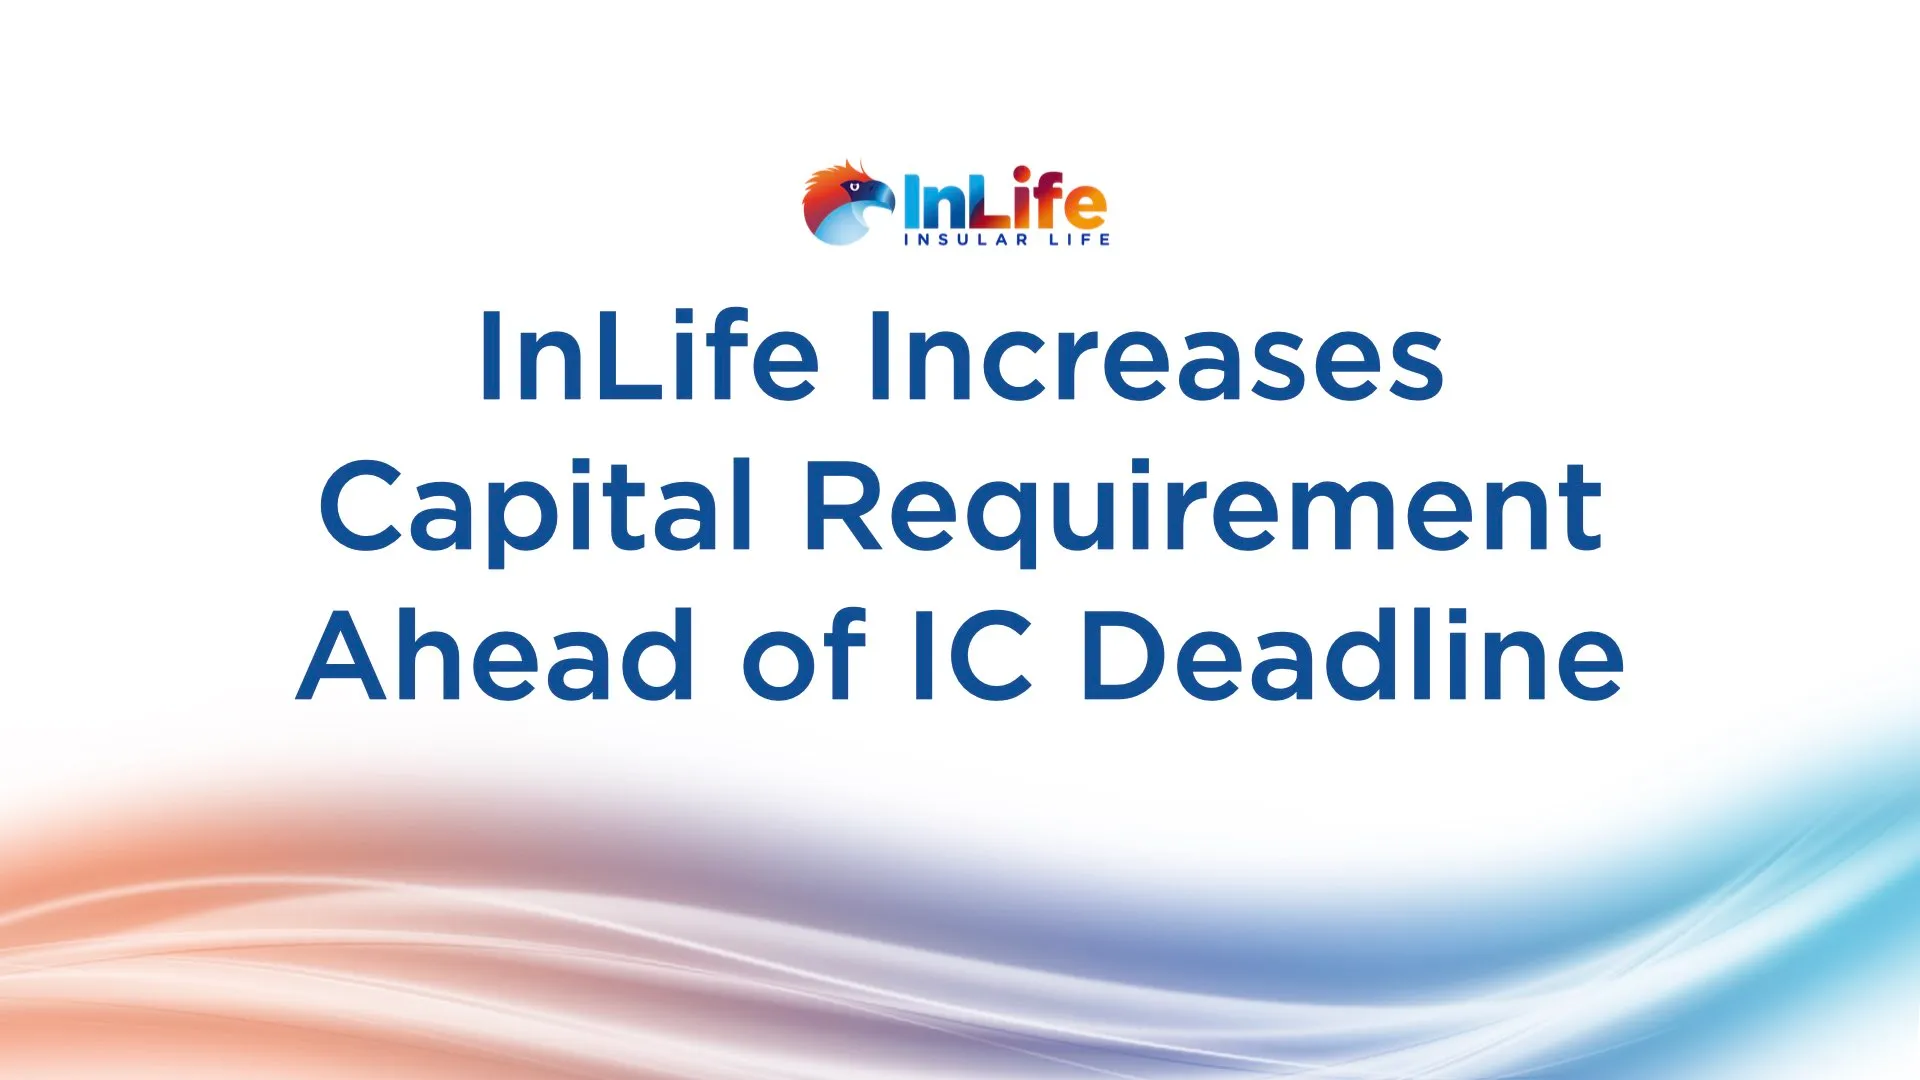 insular-life-increases-capital-requirement-ahead-of-deadline